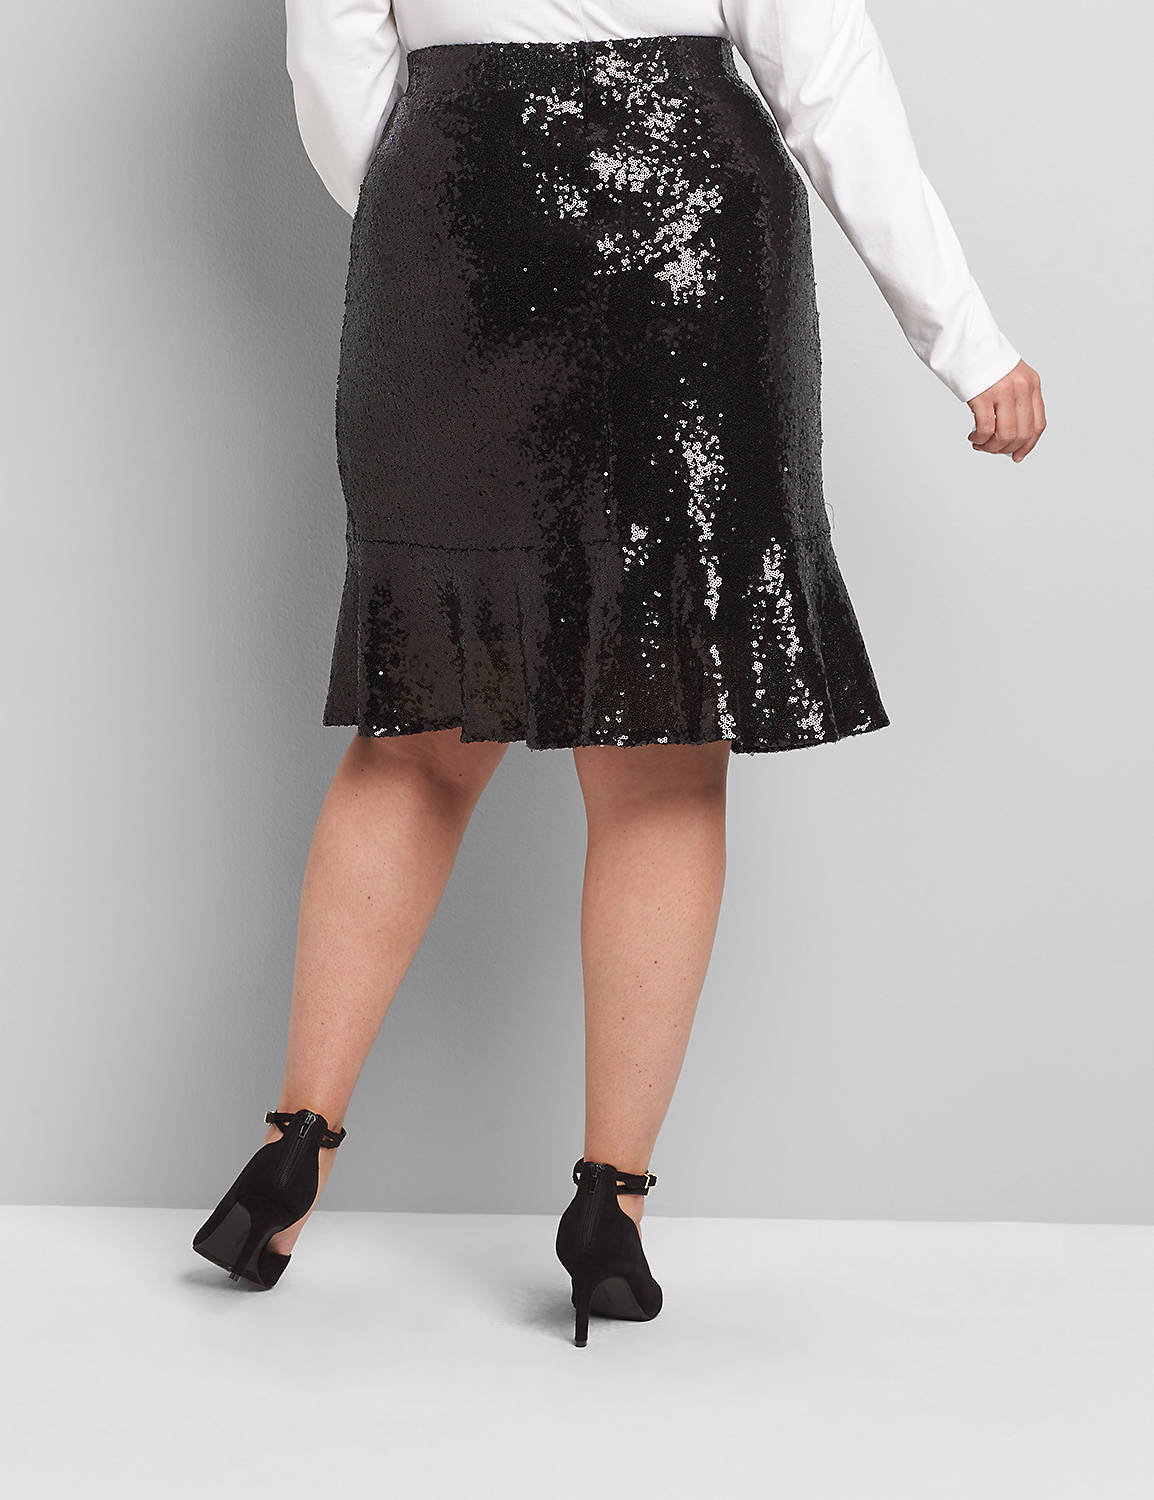 All-Over Sequins Flounce Skirt 1116854:Pitch Black LB 1000322:18/20 Product Image 2